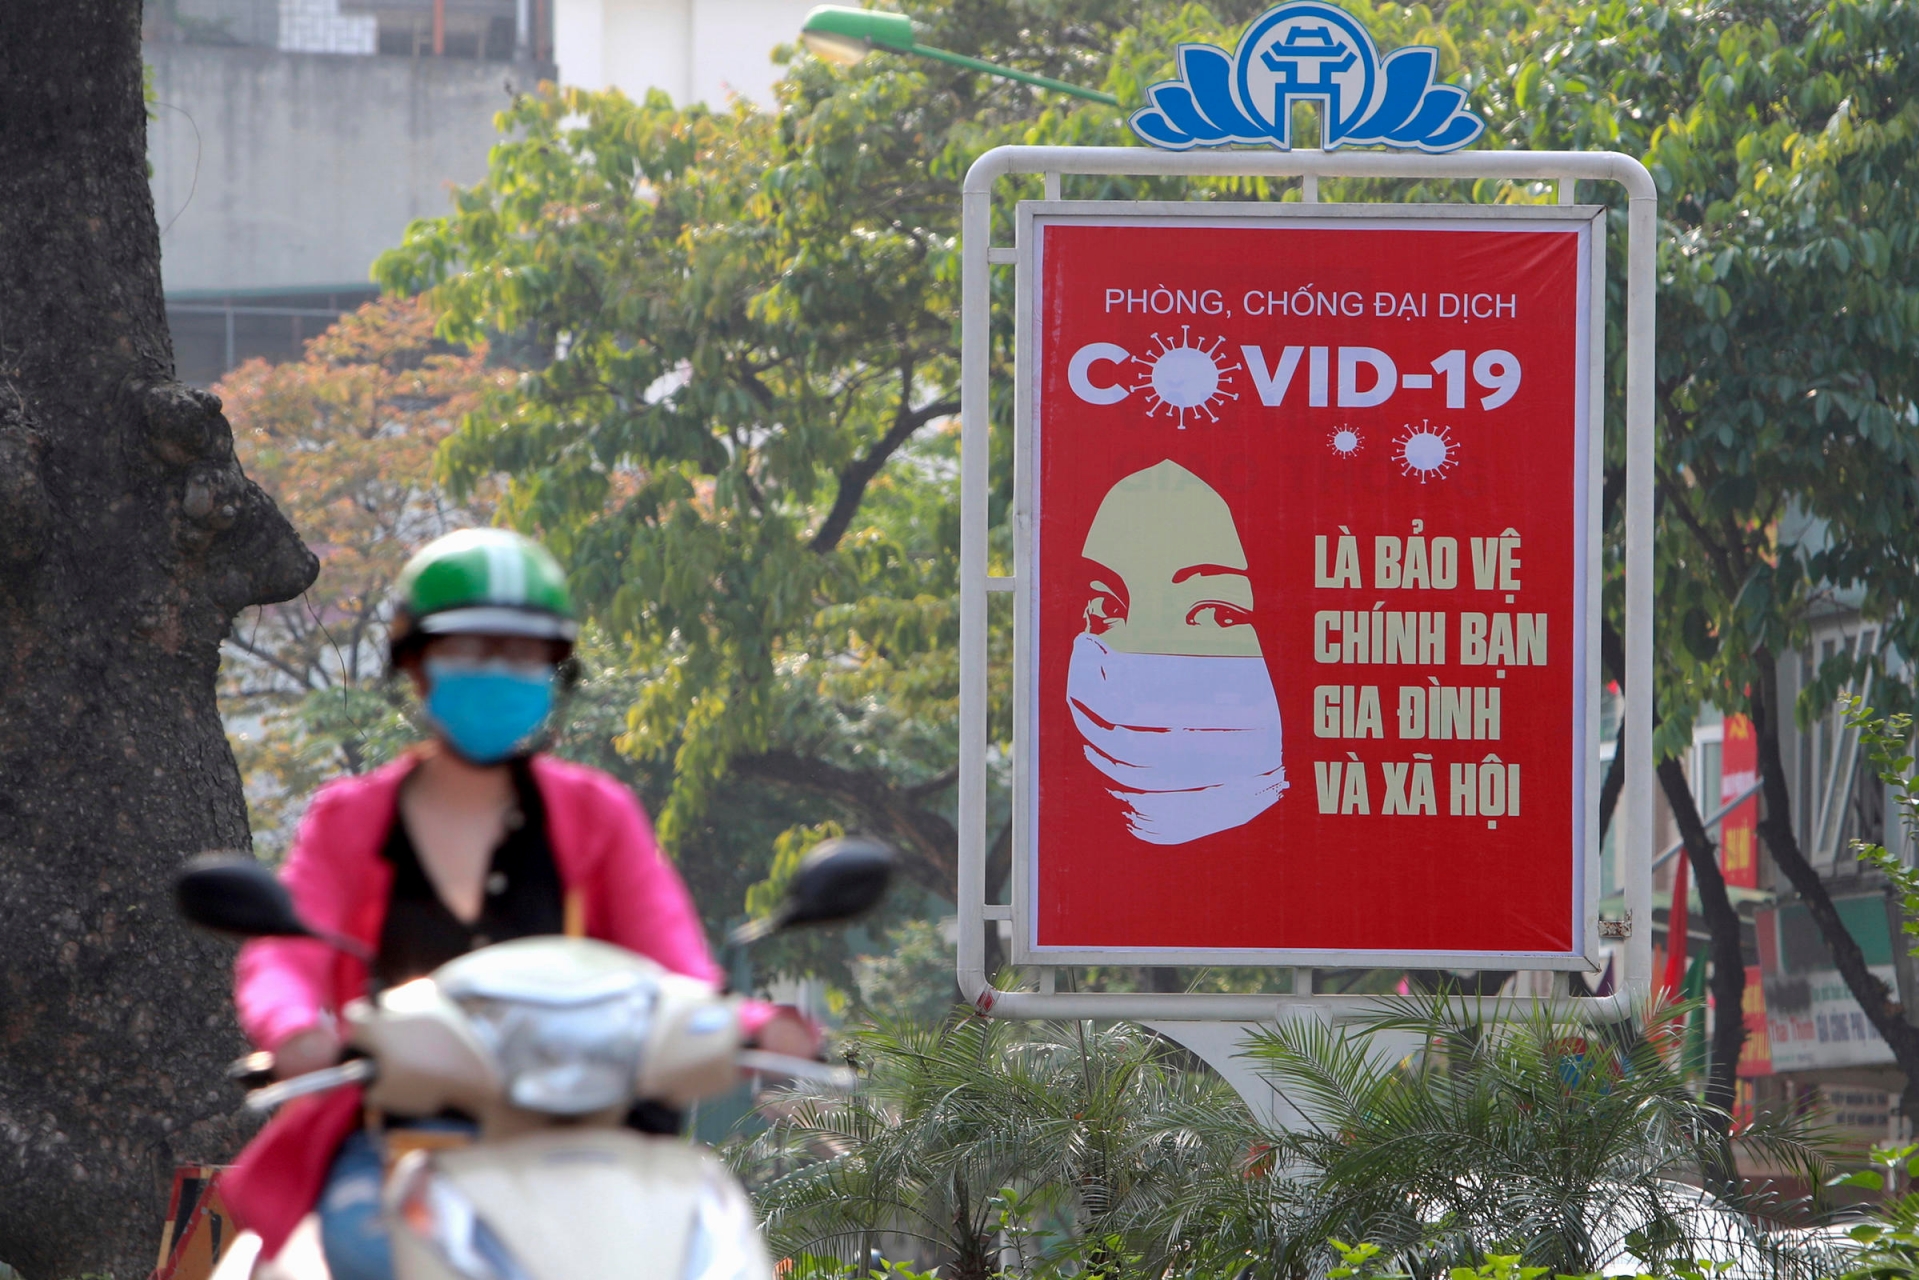 vietnam news today vietnams domestic tourism promoted after covid 19